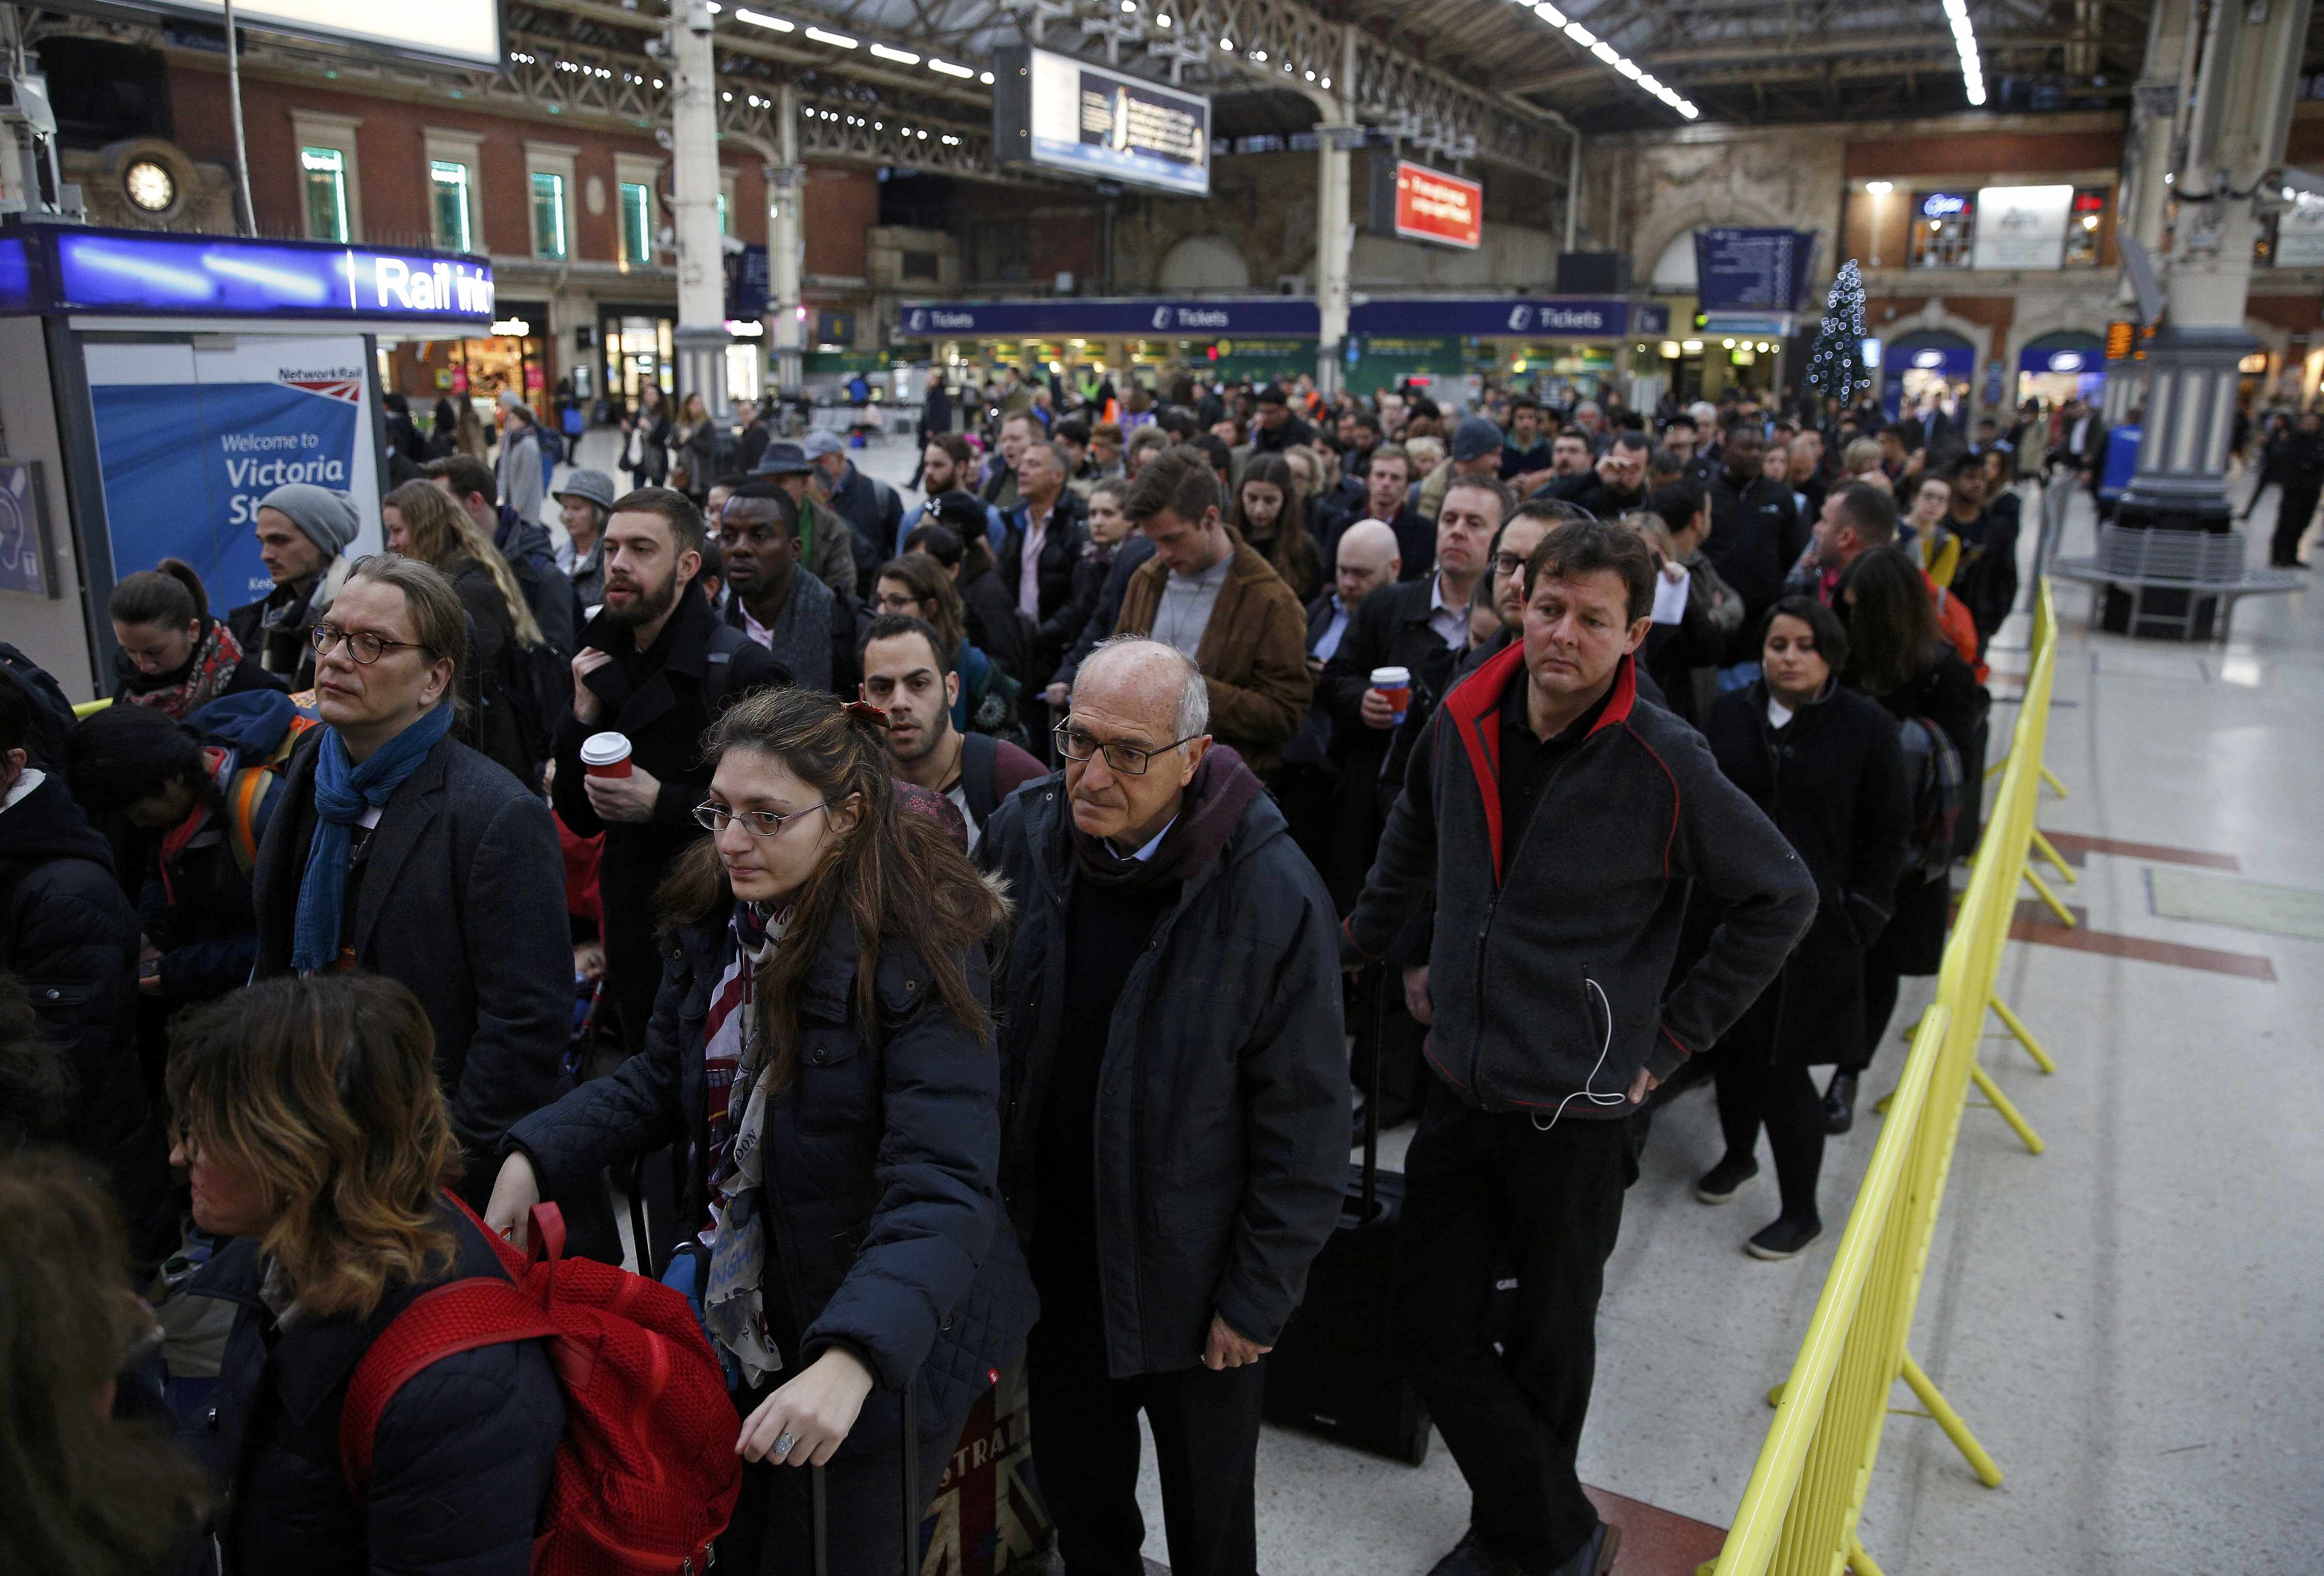 London commuters face worst rail strike disruption for decades